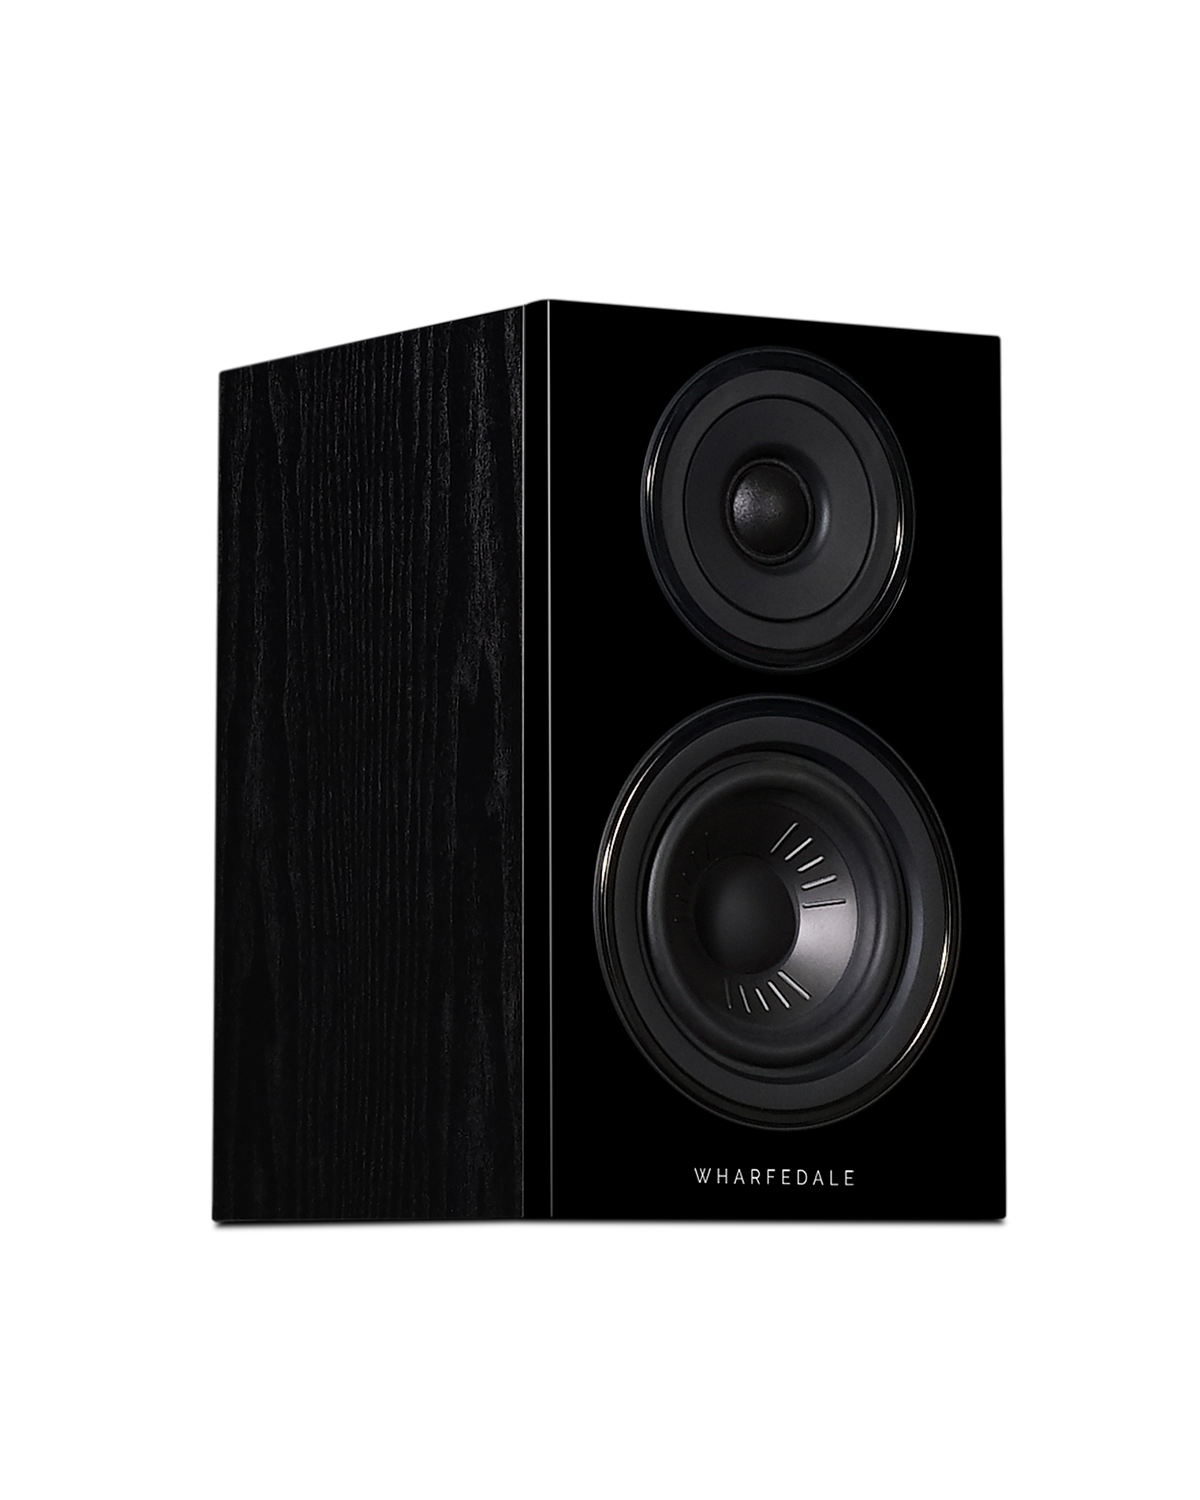 The true all-rounder, the Wharfedale DIAMOND 12.1 is a traditional standmount (or bookshelf) speaker that embodies the history and performance values of the Wharfedale DIAMOND series. The perfect ‘affordable’ hi-fi speaker, the DIAMOND 12.1 offers the best of both worlds – compact size with power and detail.